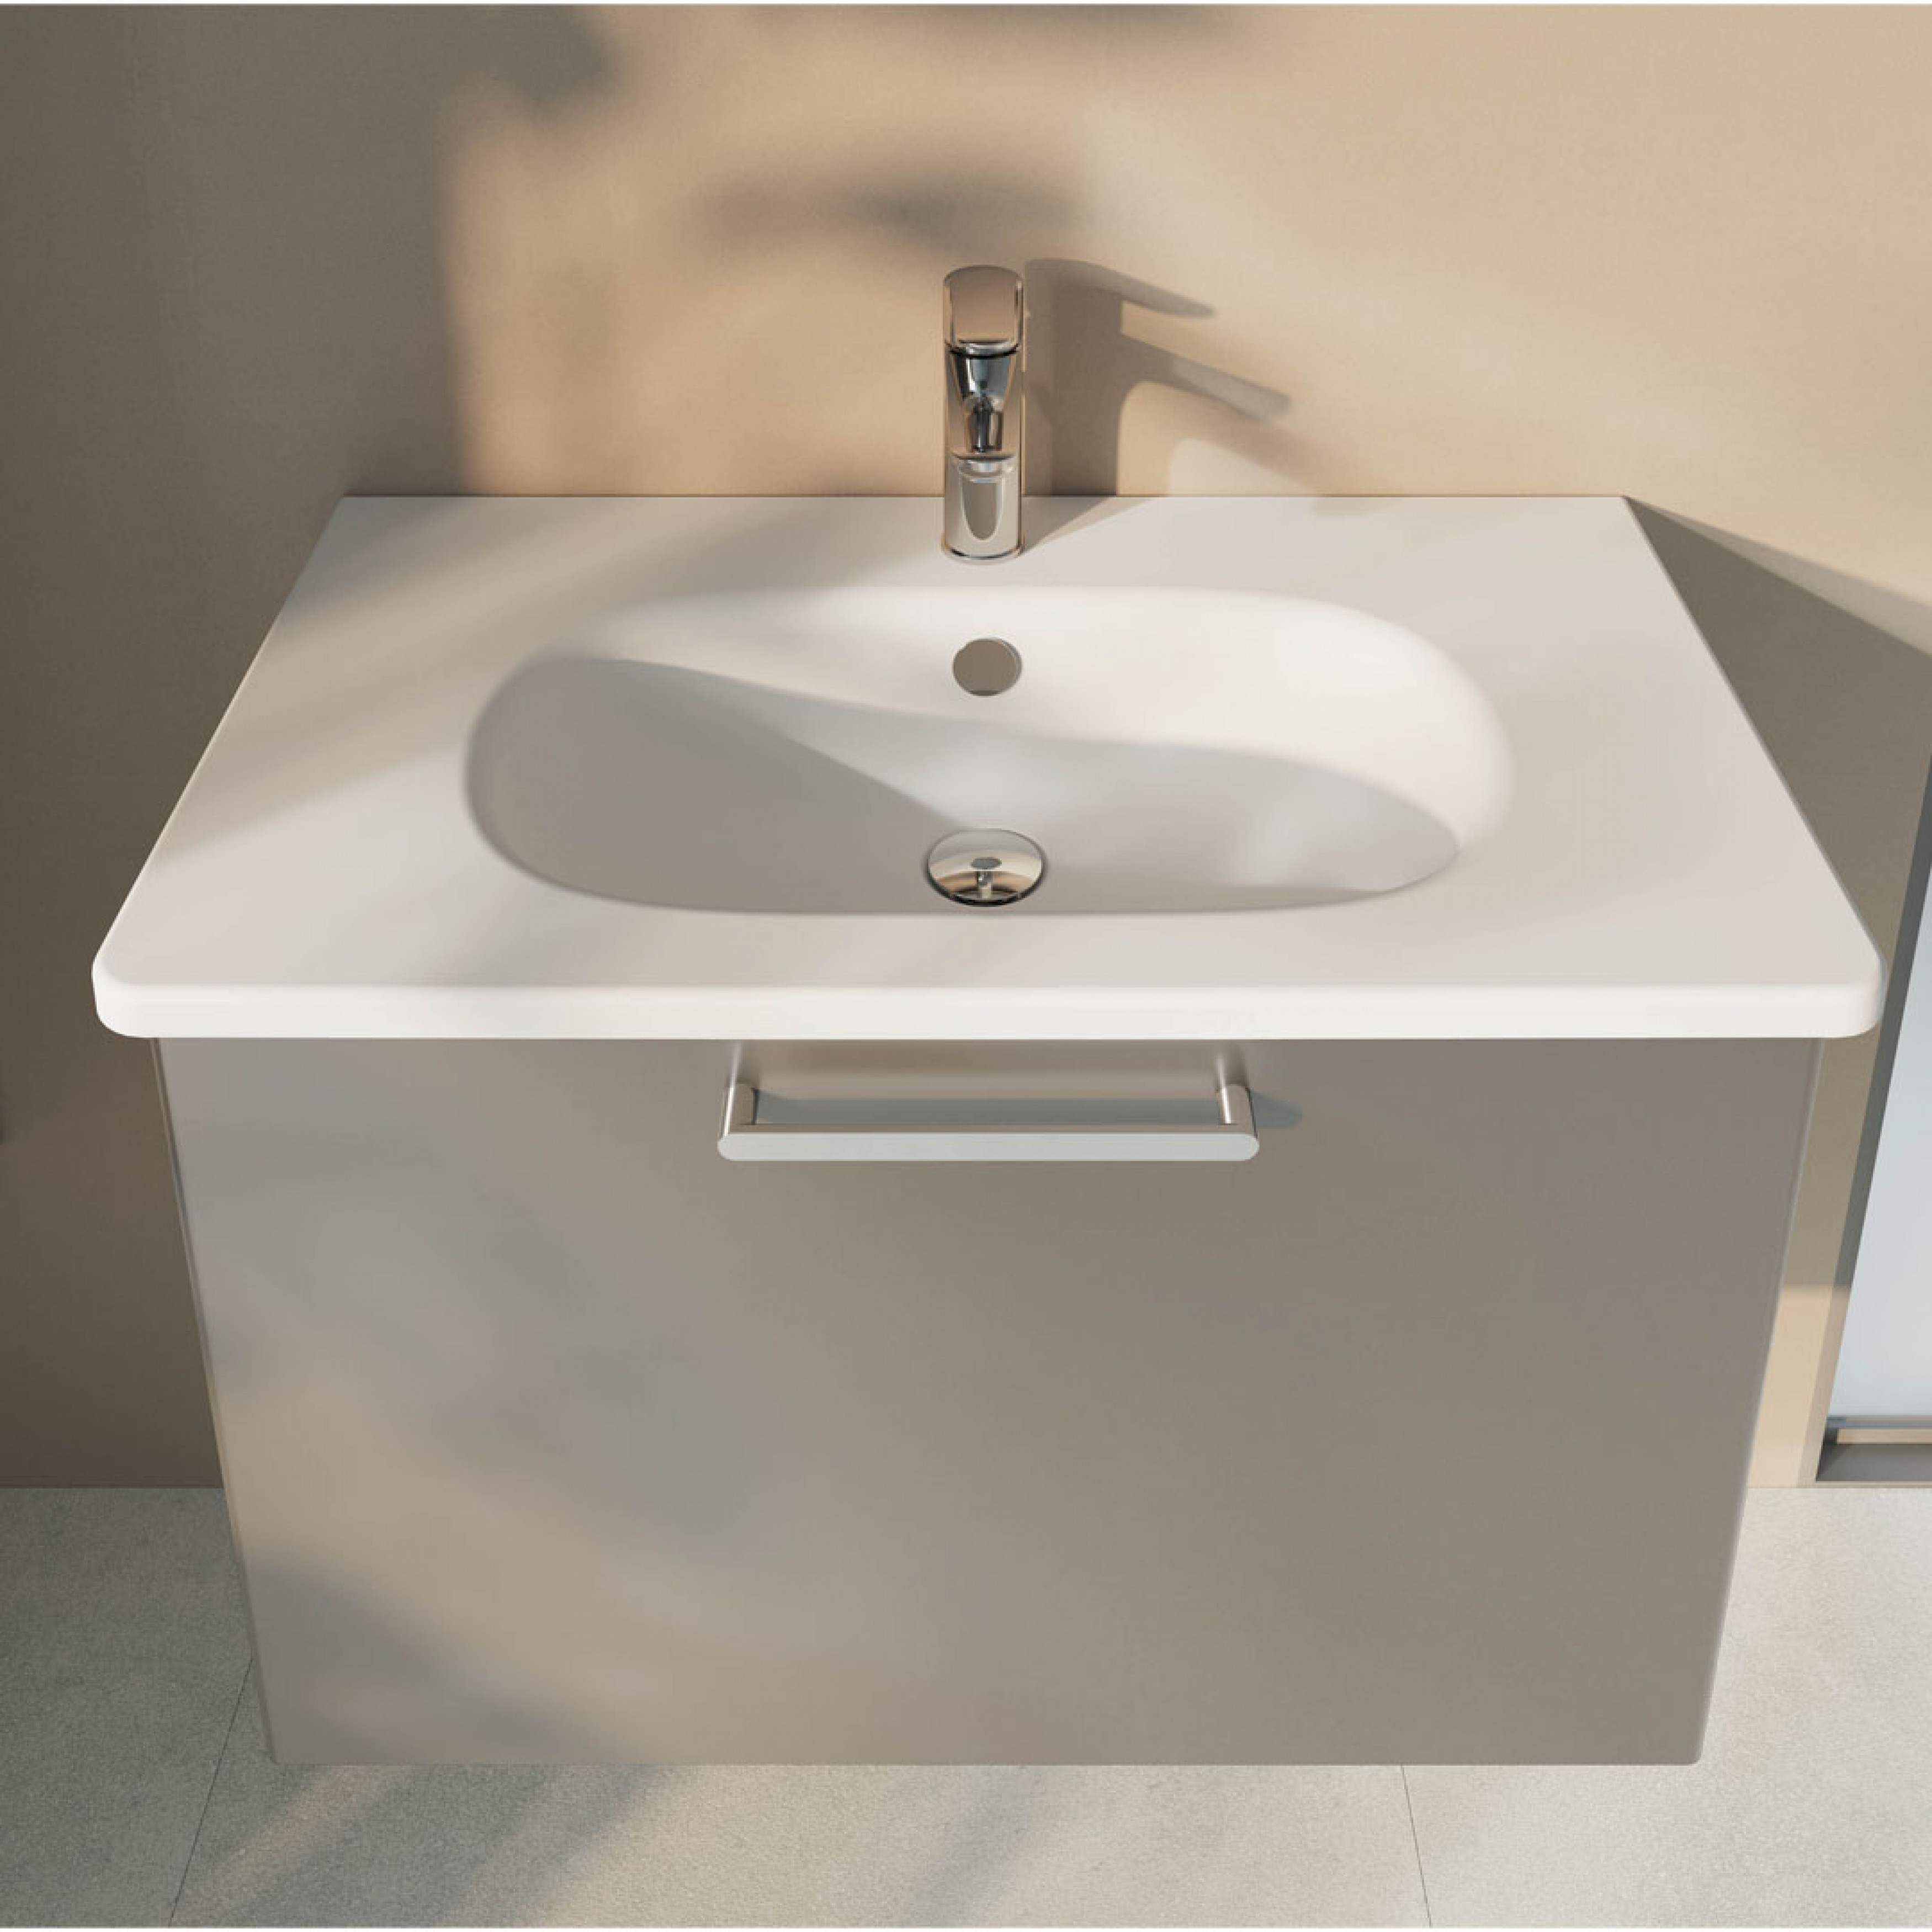 VitrA Zentrum washbasin with chrome coloured tapes and a grey storage drawn below